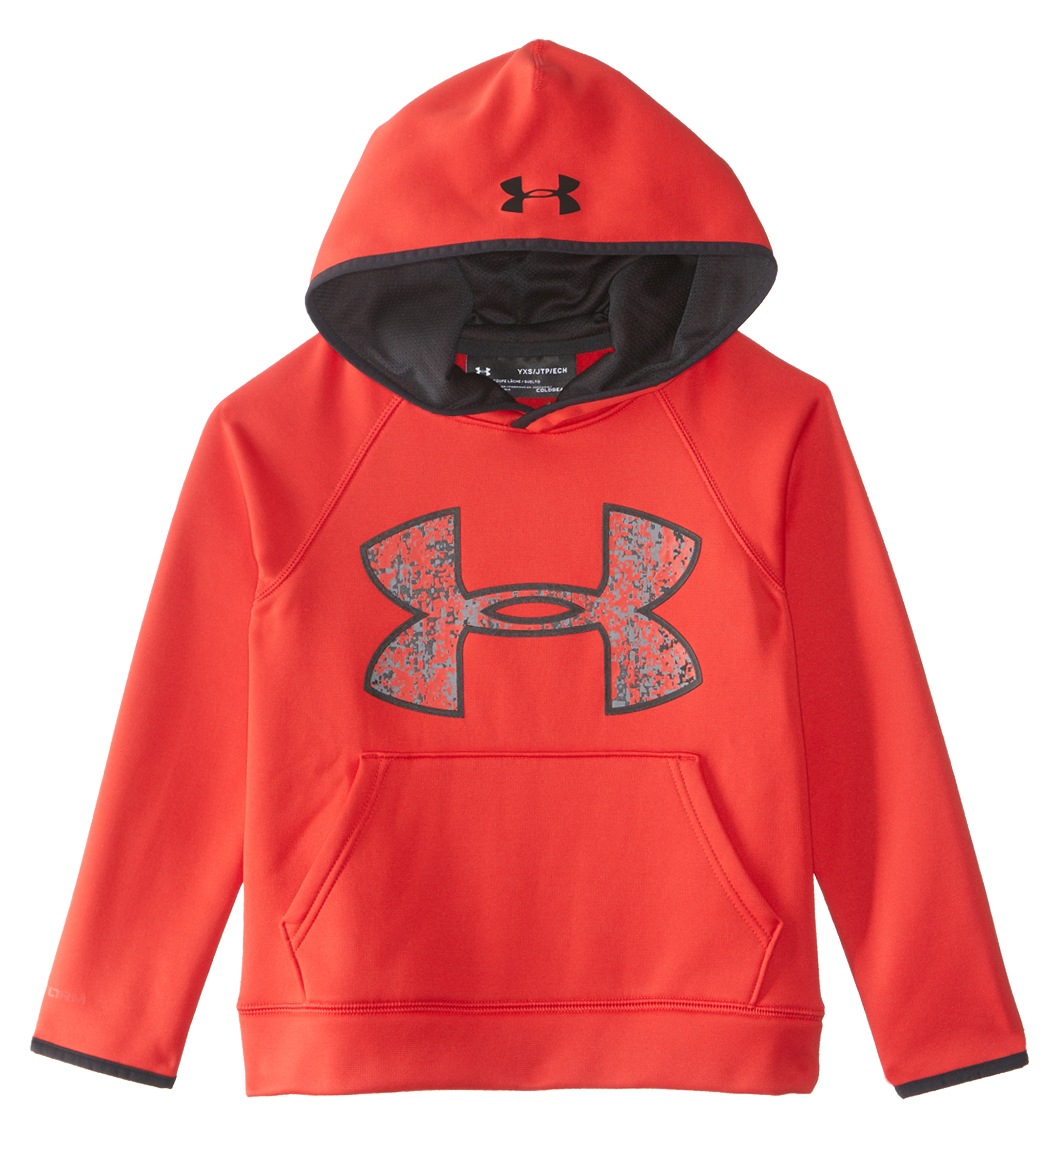 Under Armour Boys' Af Big Logo Hoody - Red-Black -Red Small Red/Black /Red Cotton/Polyester - Swimoutlet.com